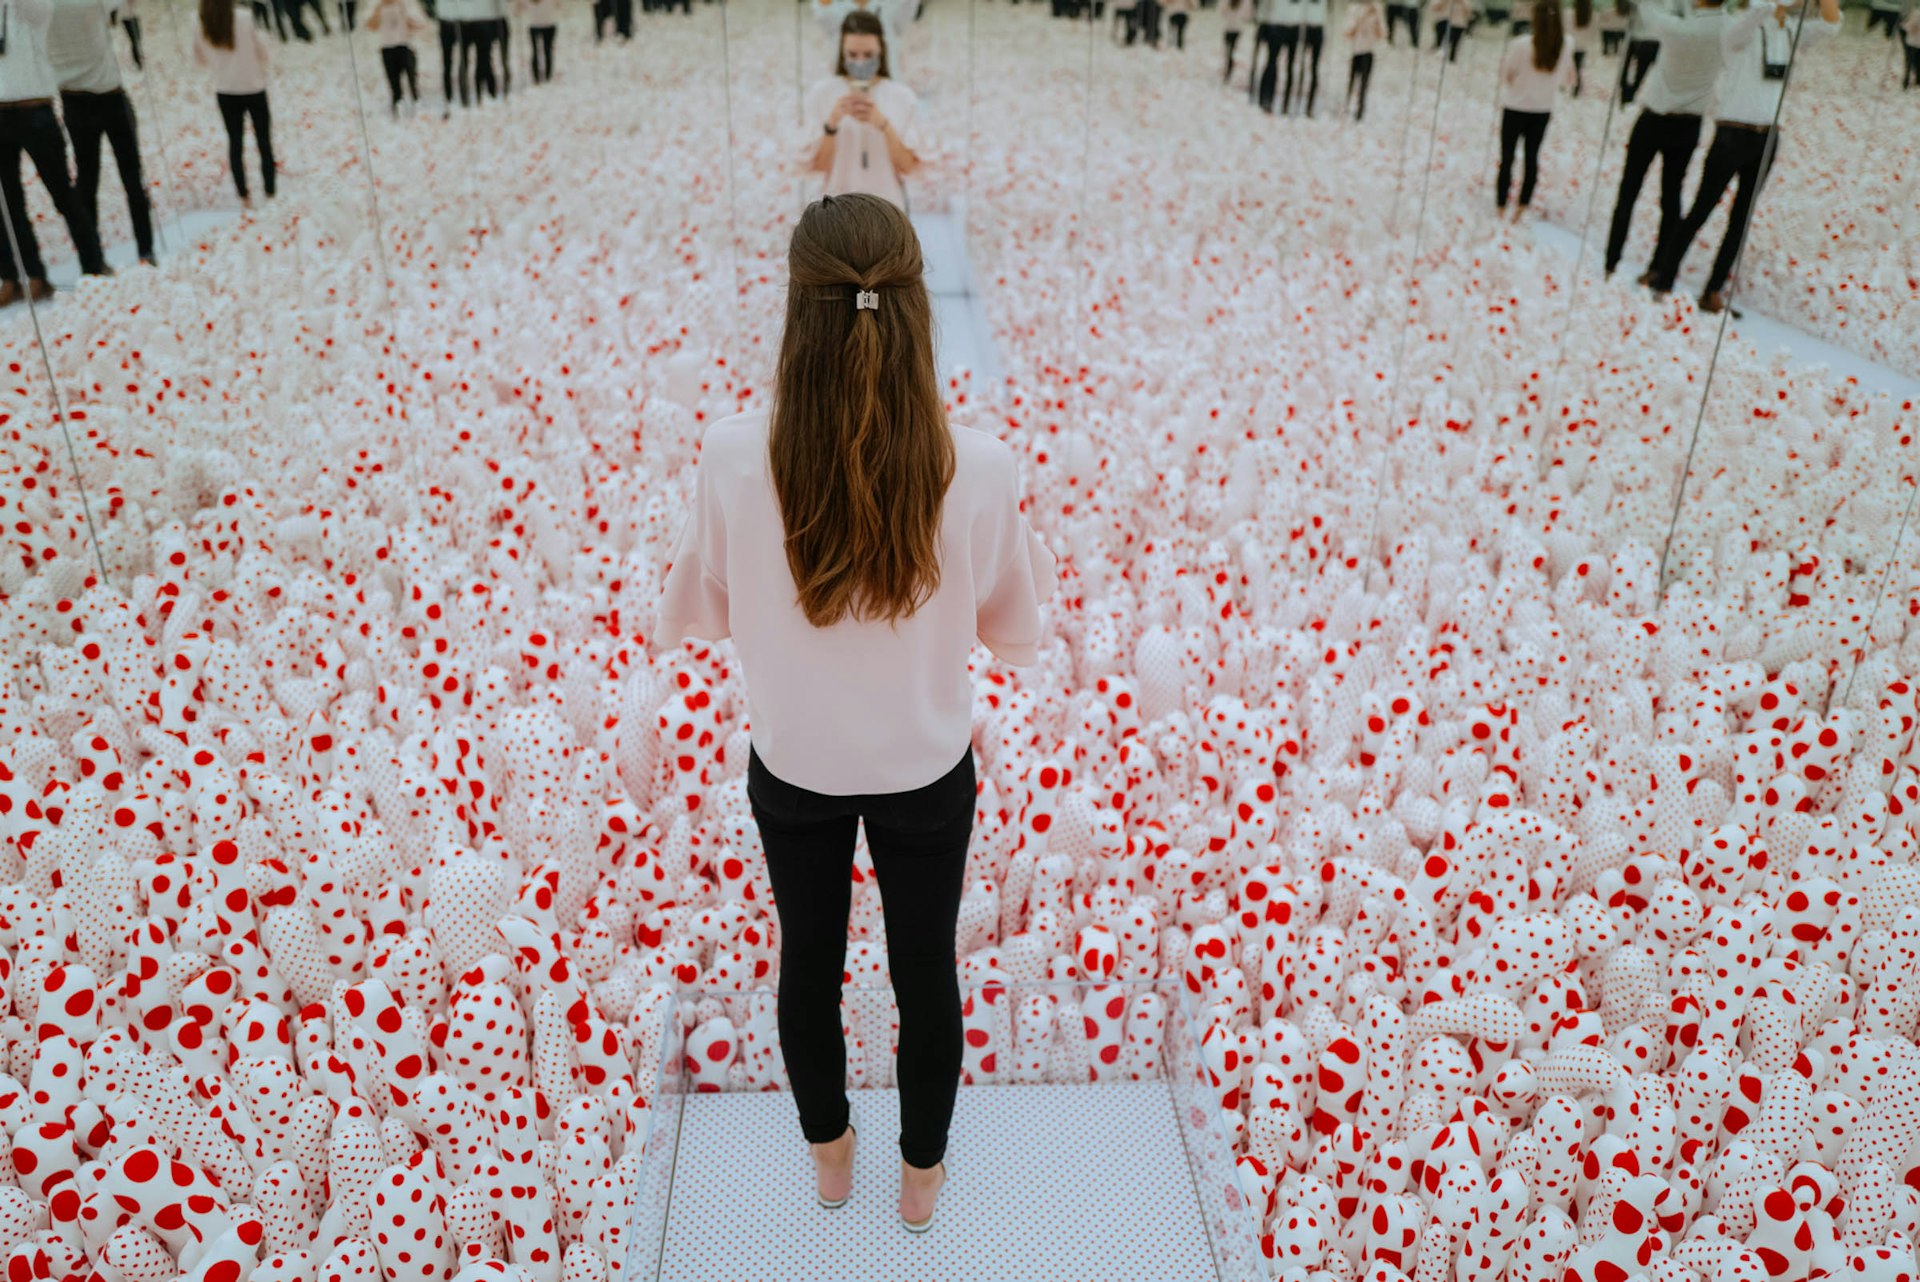 A visitor standing in Yayoi Kusama’s Infinity Mirror Room—Phalli’s Field (1965/2017), a mirror-lined room filled with phallic red-and-white polka-dotted sculptures